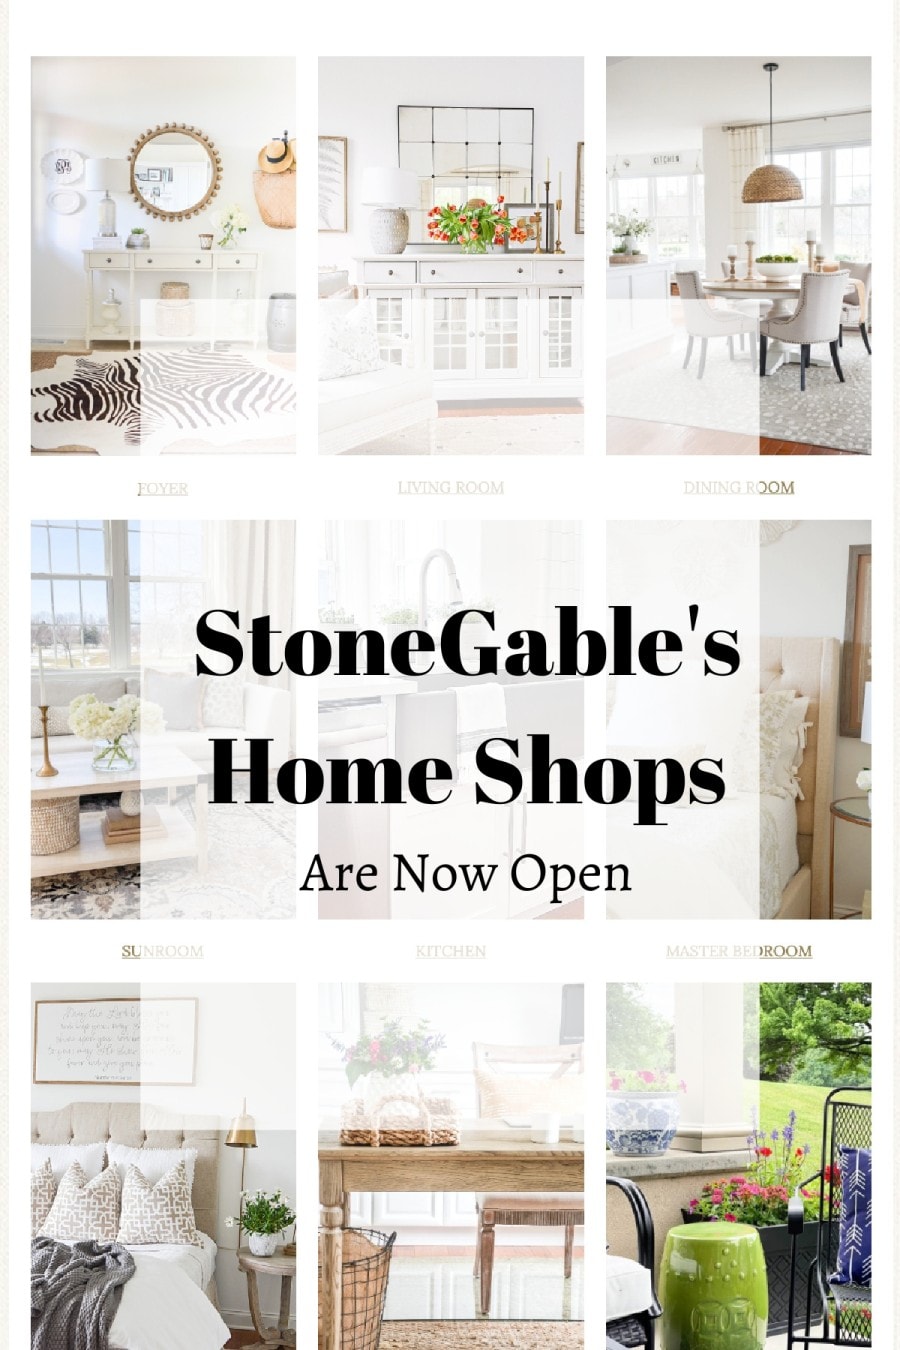 Now you Can Shop StoneGable’s Home Shops